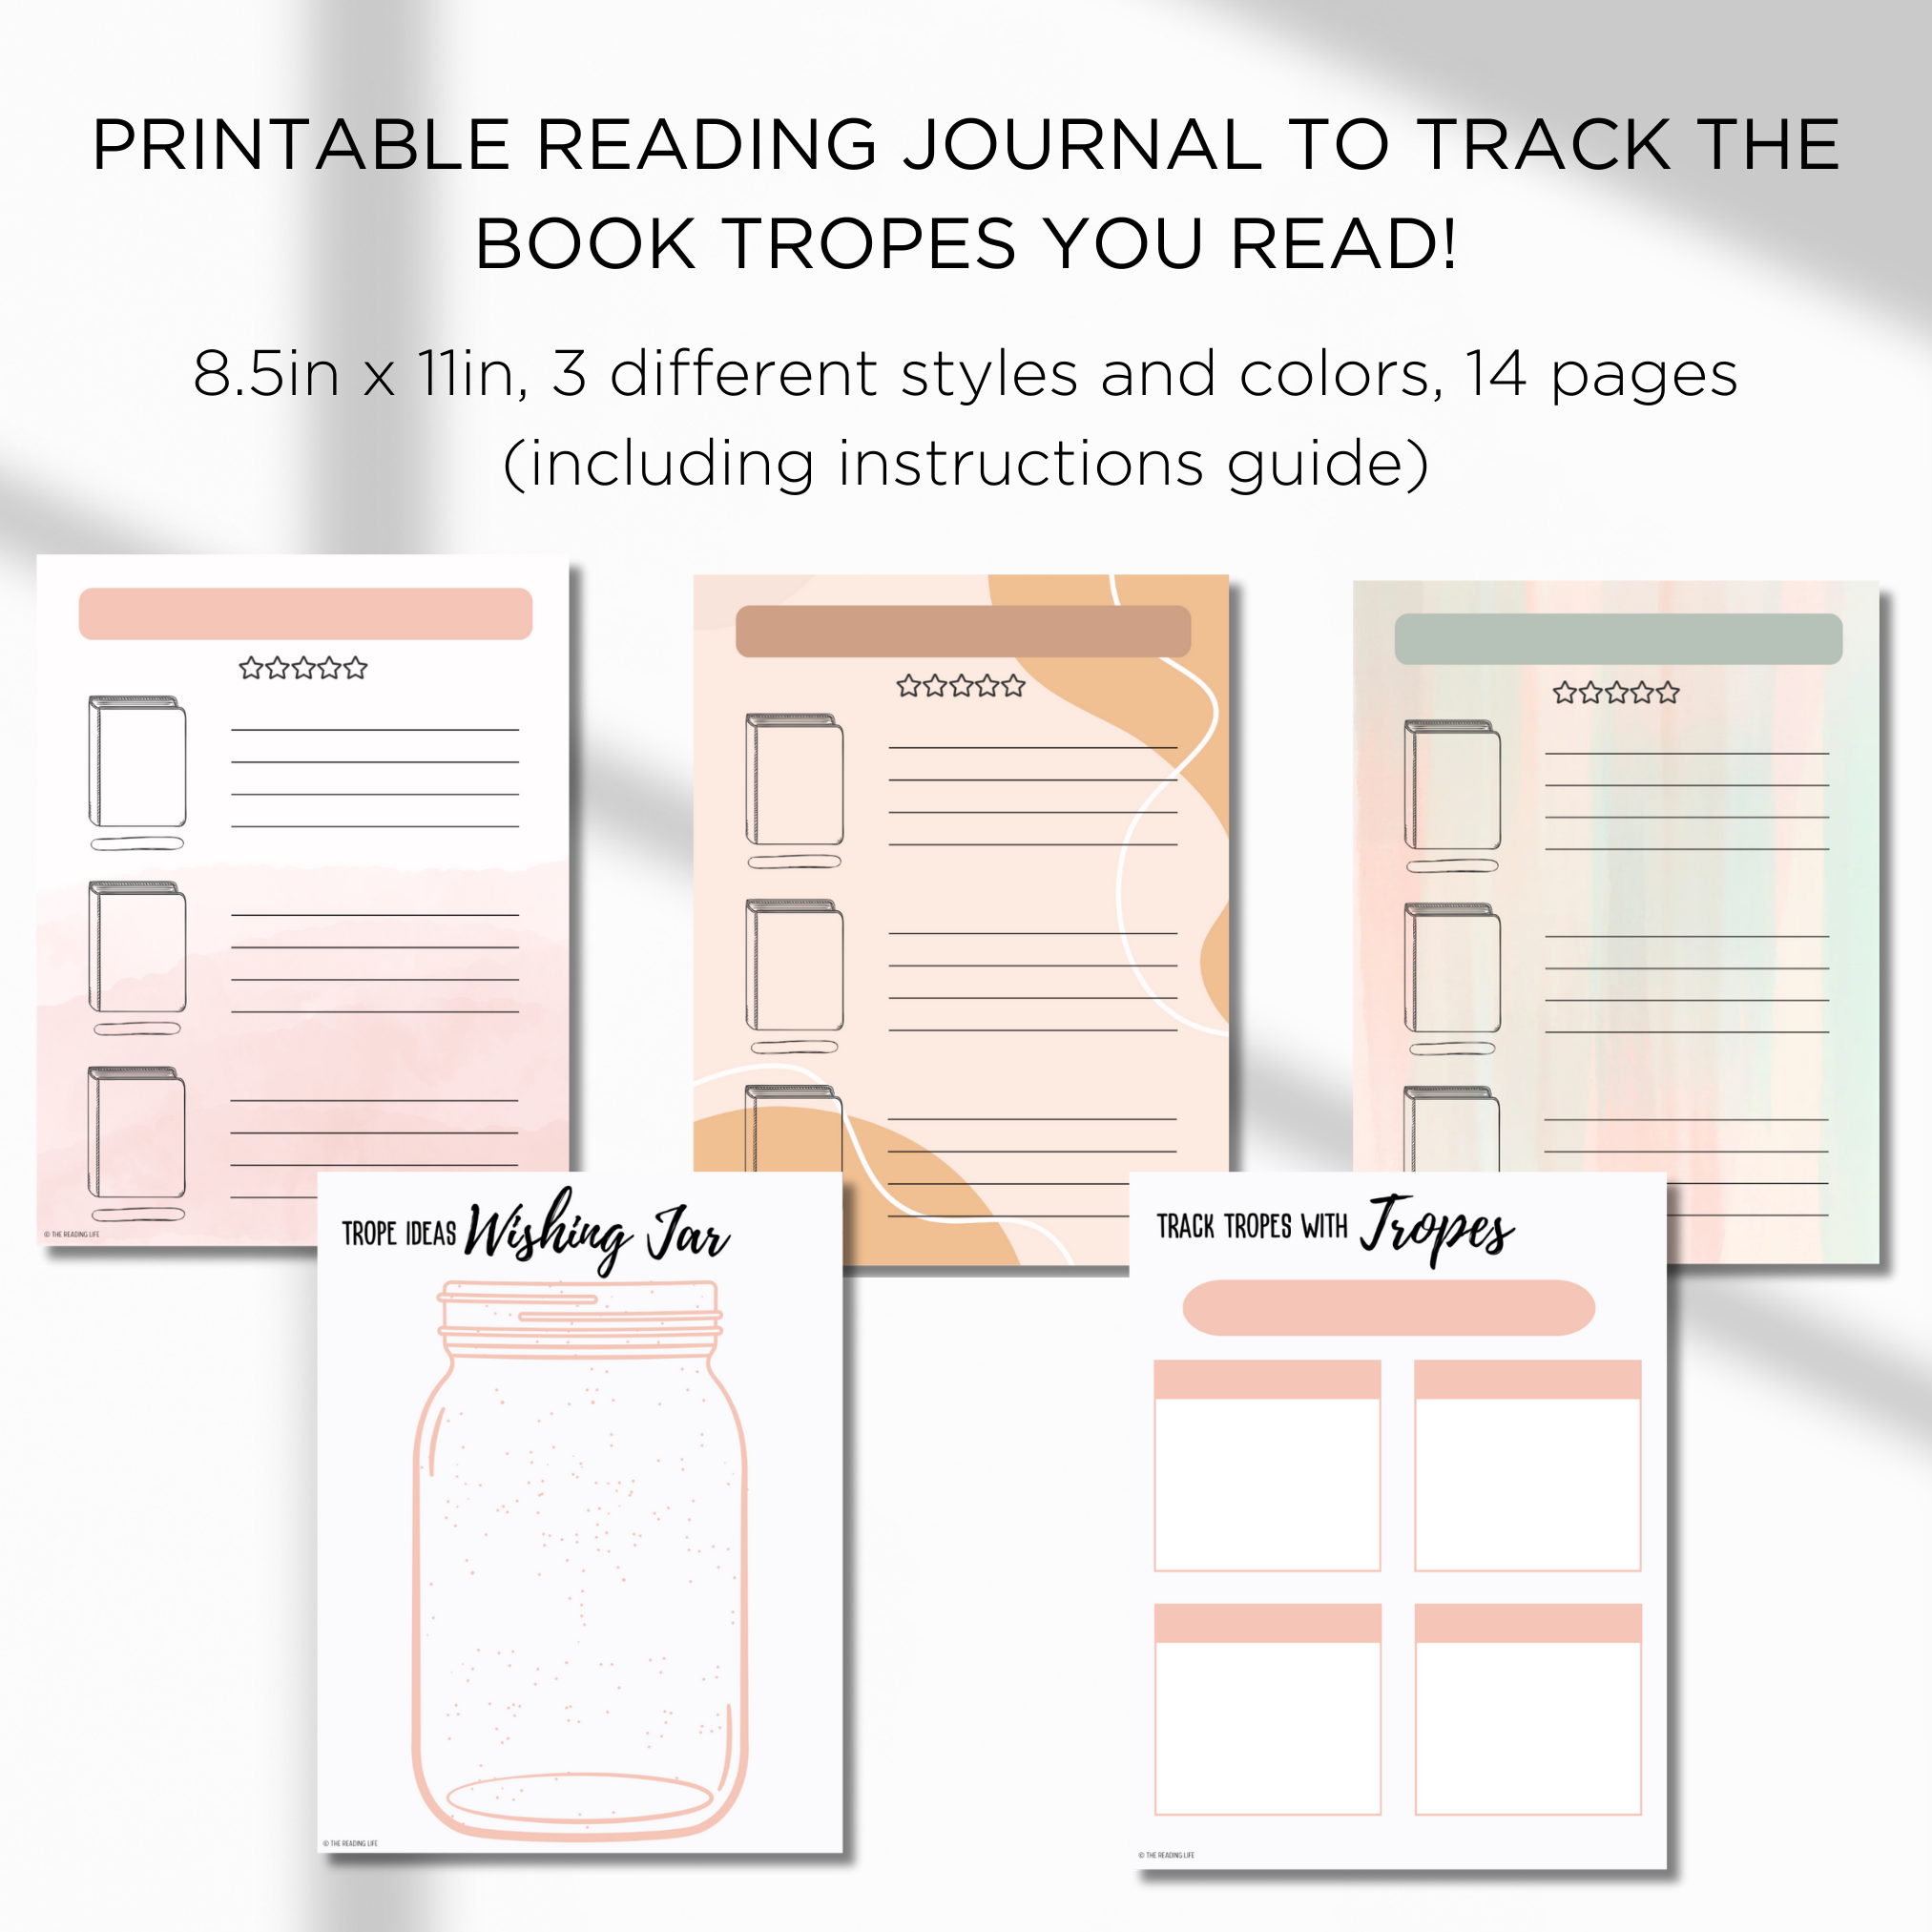 A guide to the reading journal